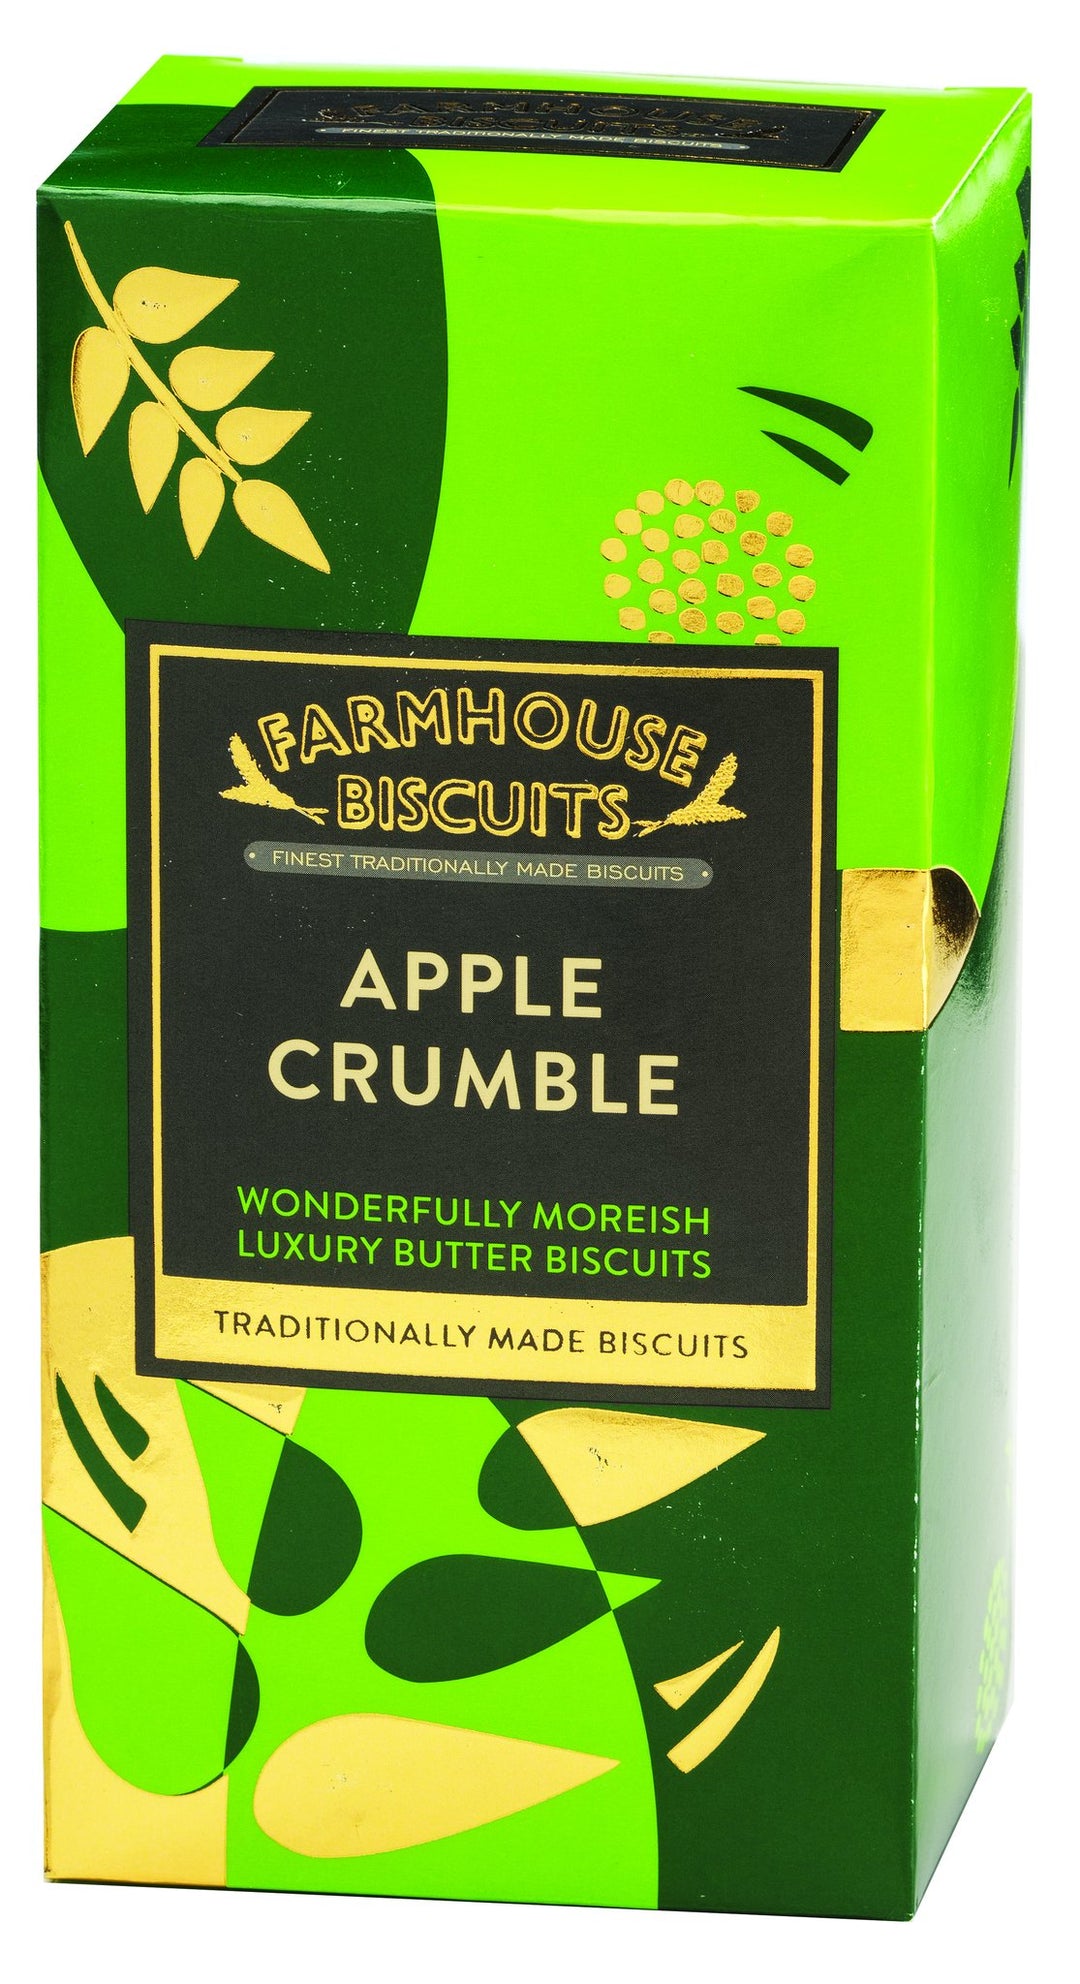 Farmhouse Biscuits Luxury Apple Crumble 150g